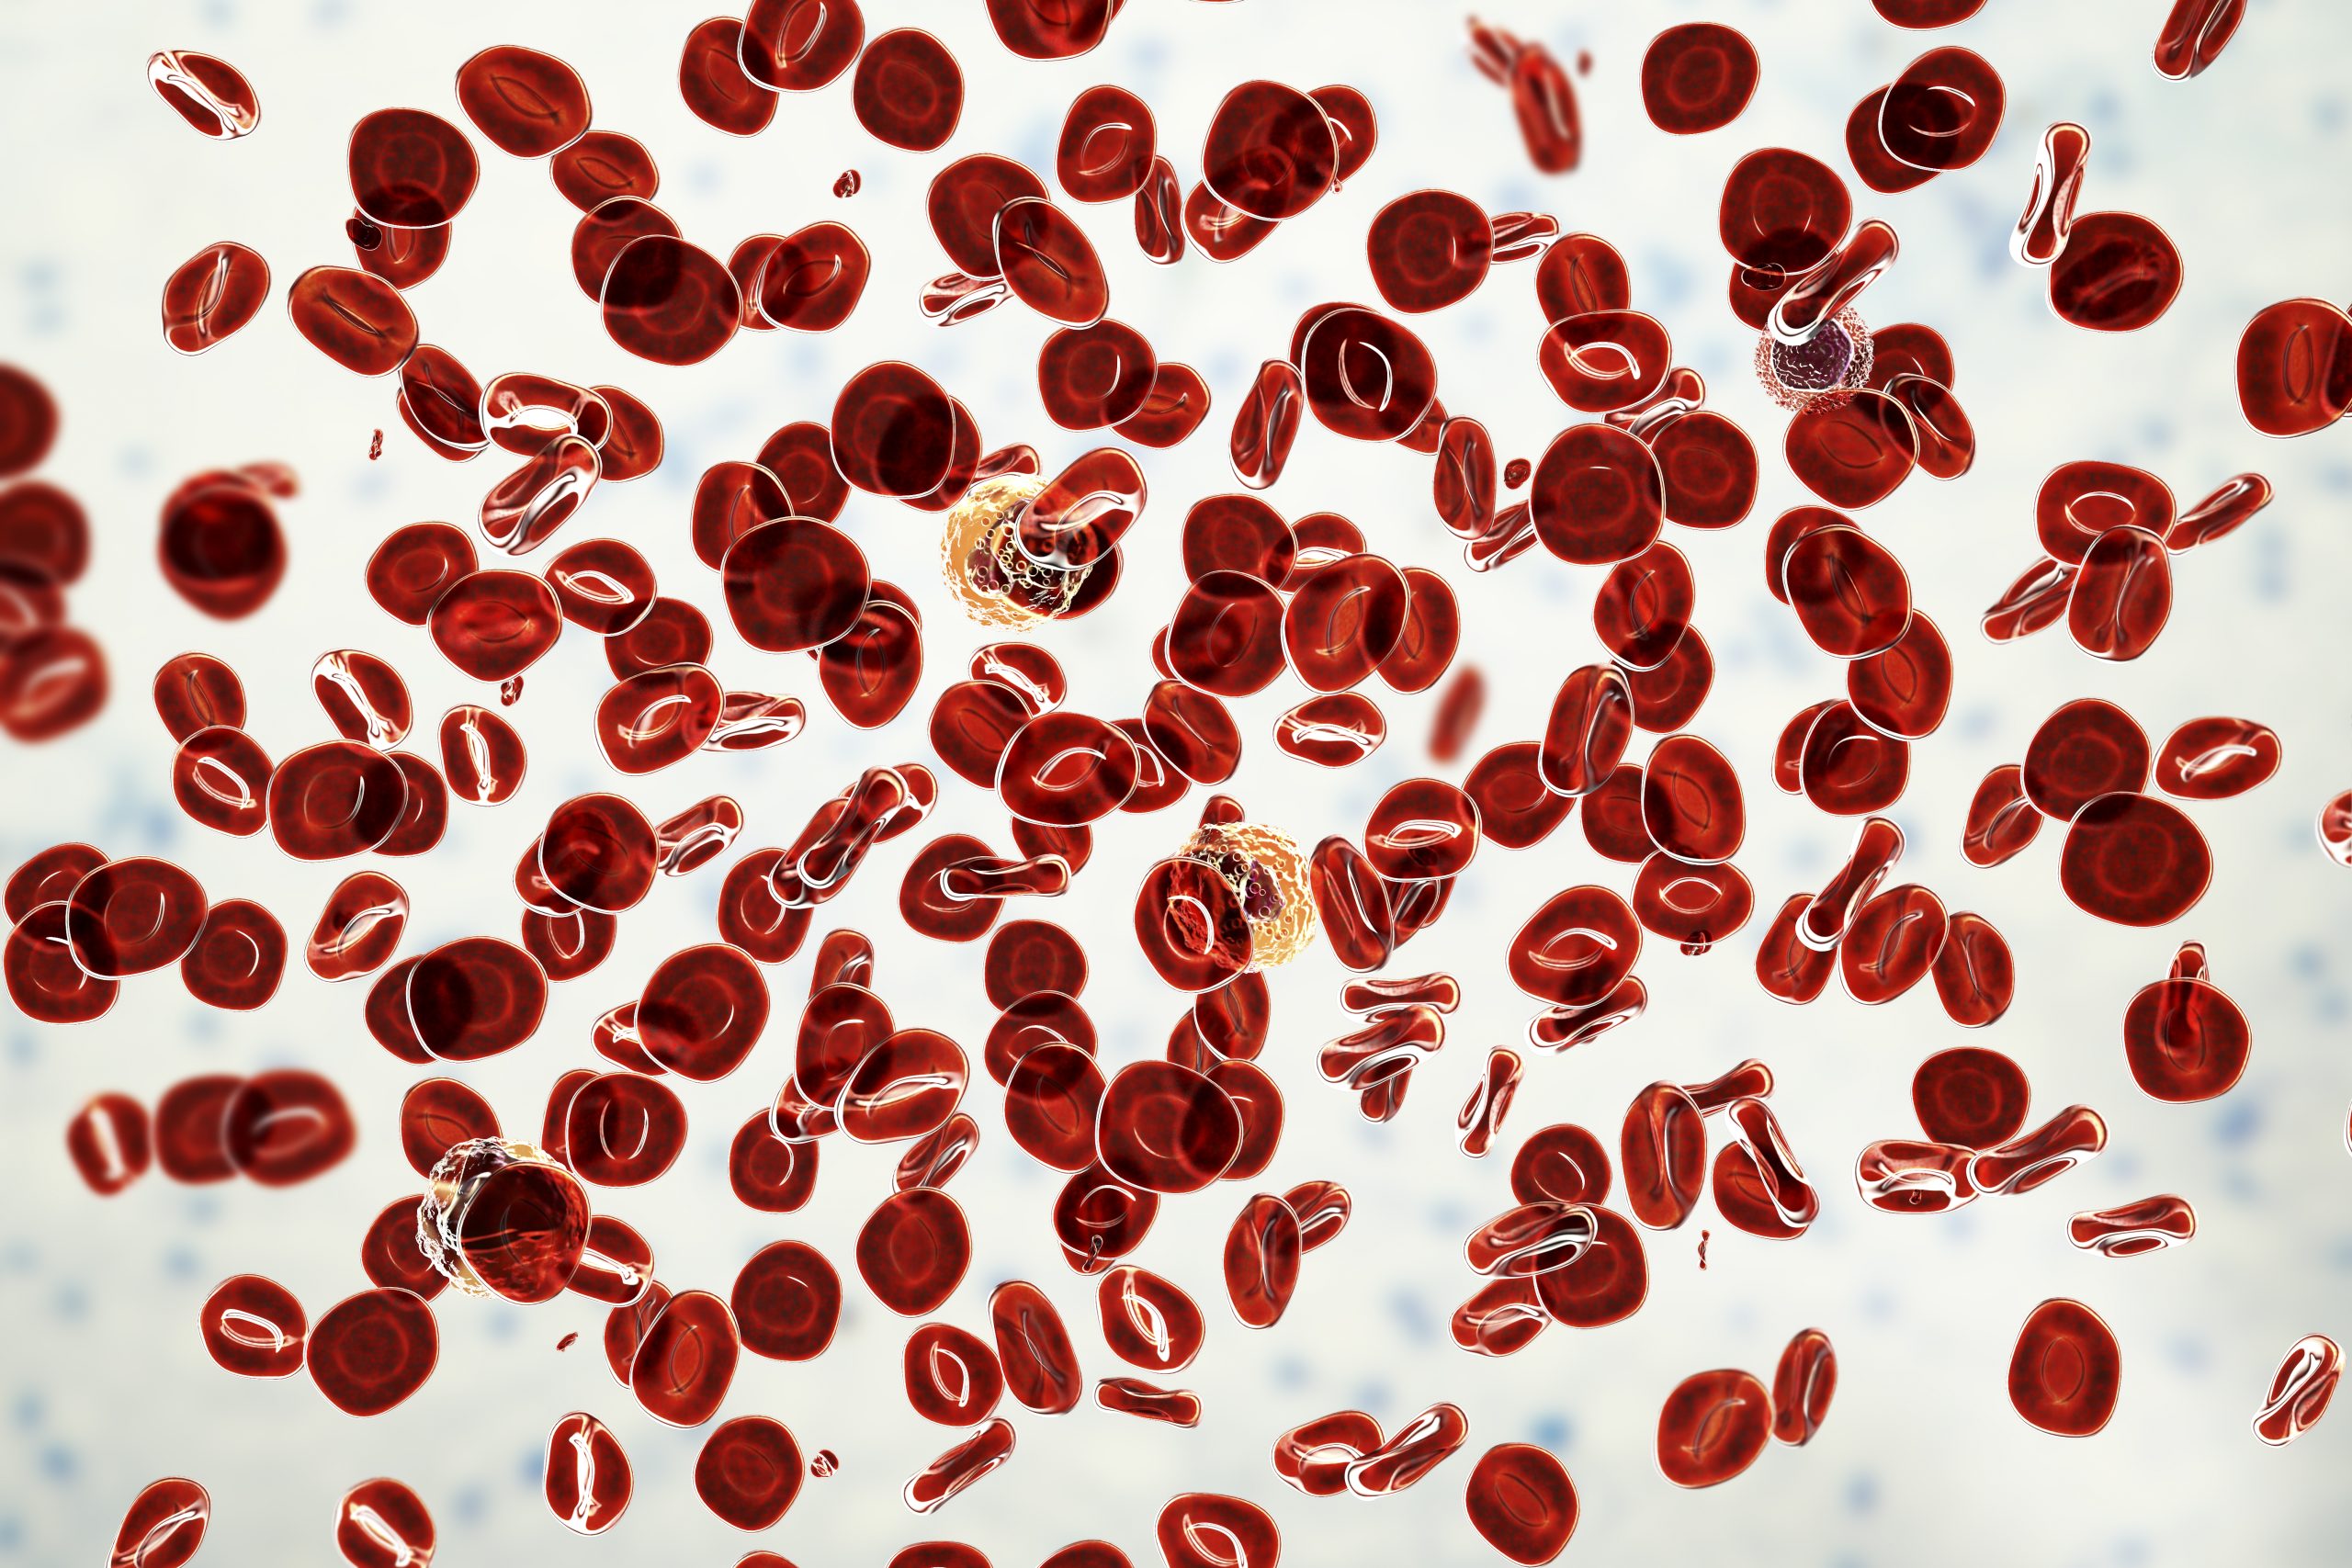 Polycythemia or Too Many Red Blood Cells